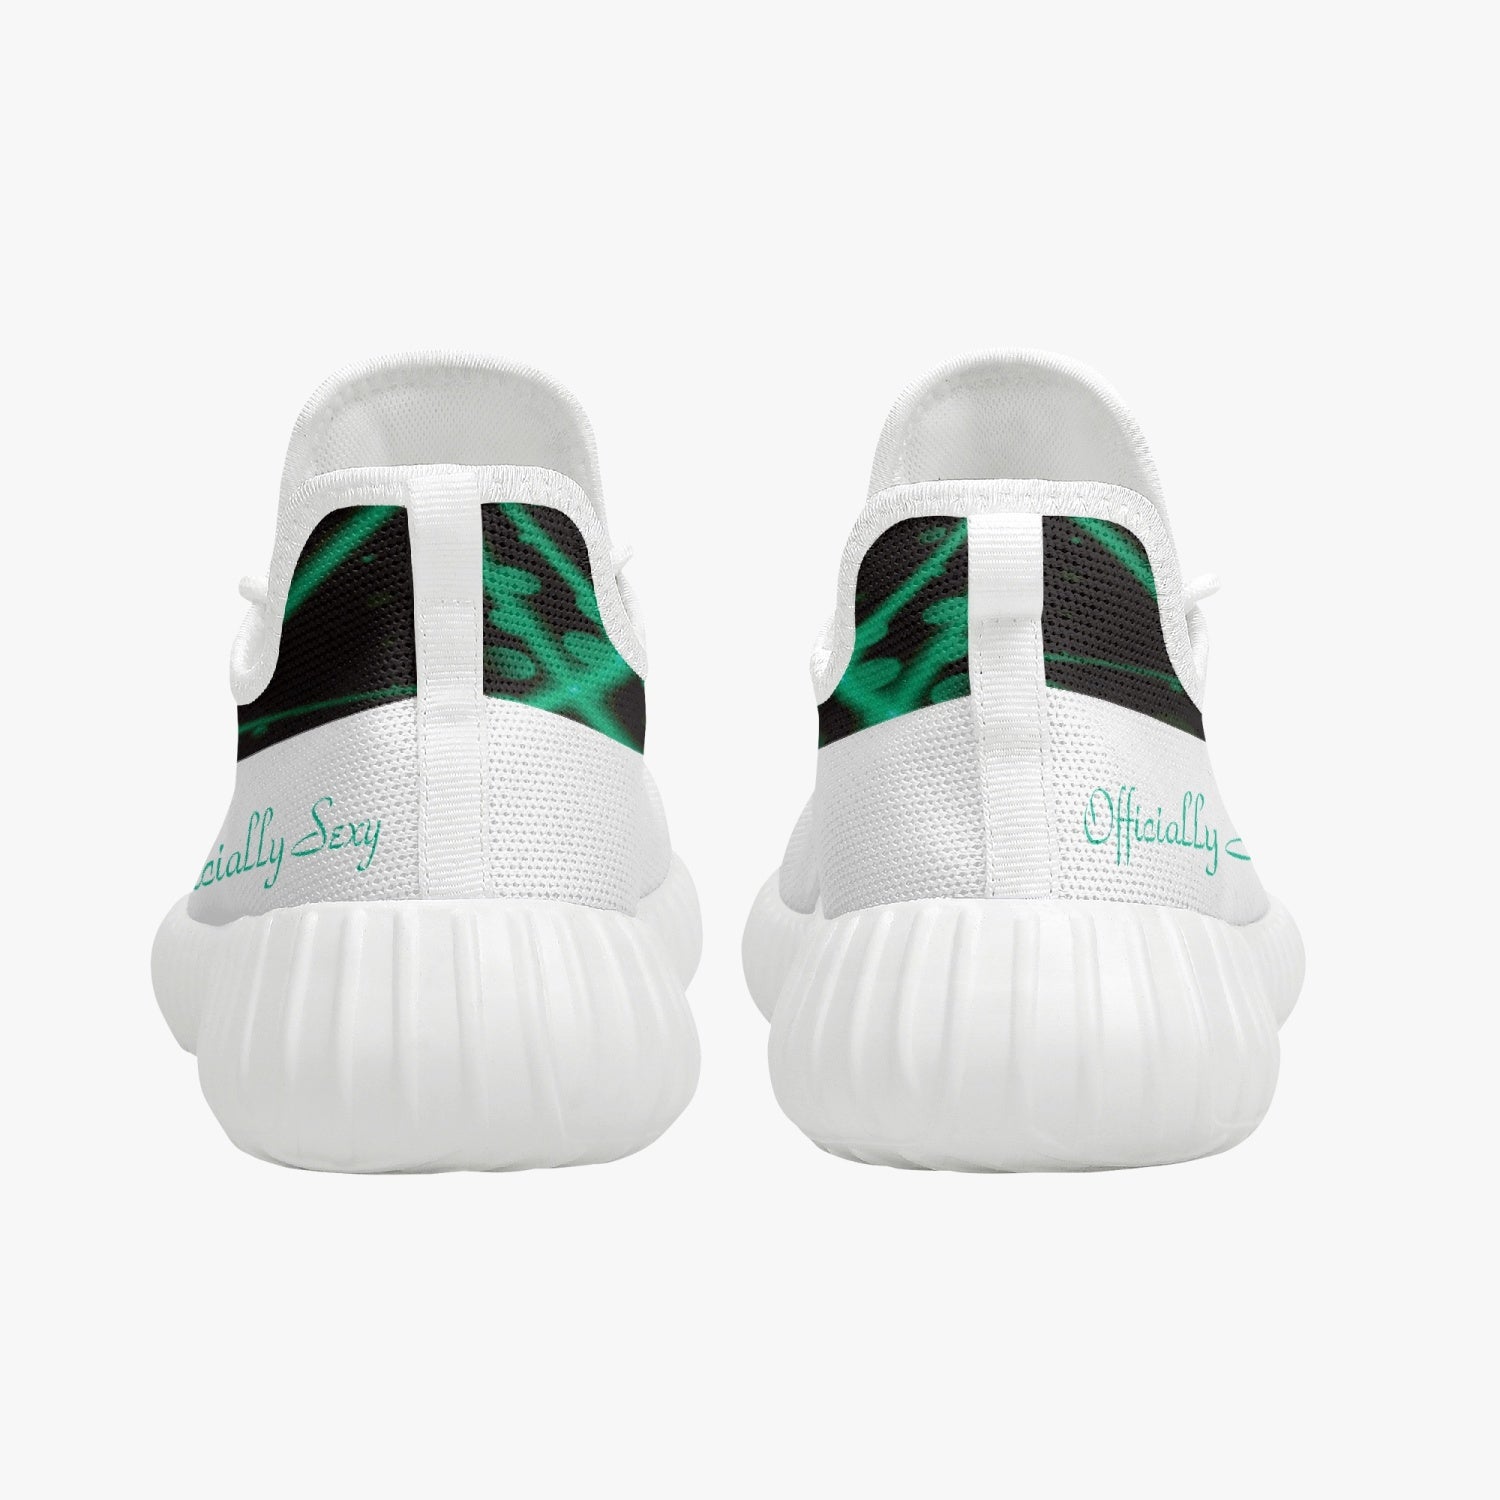 Officially Sexy Baby Mint & White Laser Print Mesh Knit Sneakers - With White or Black Sole